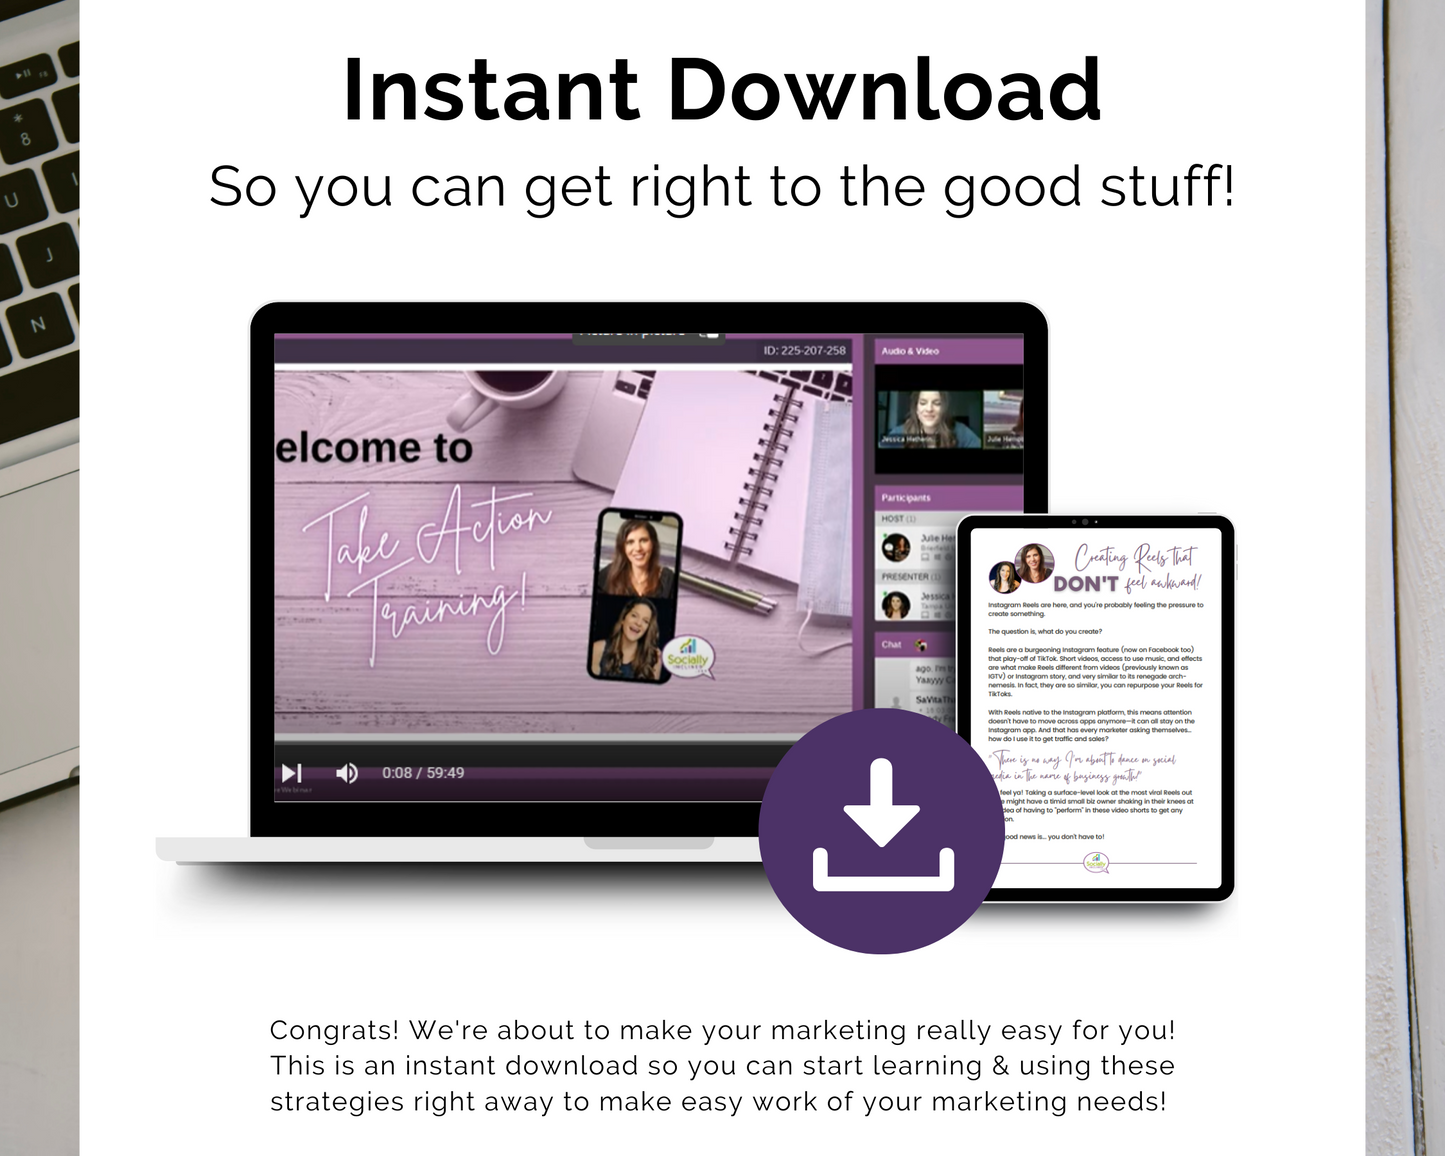 Instant download with TAT - Reels For Biz Masterclass provided for immediate access to the good stuff by Get Socially Inclined.